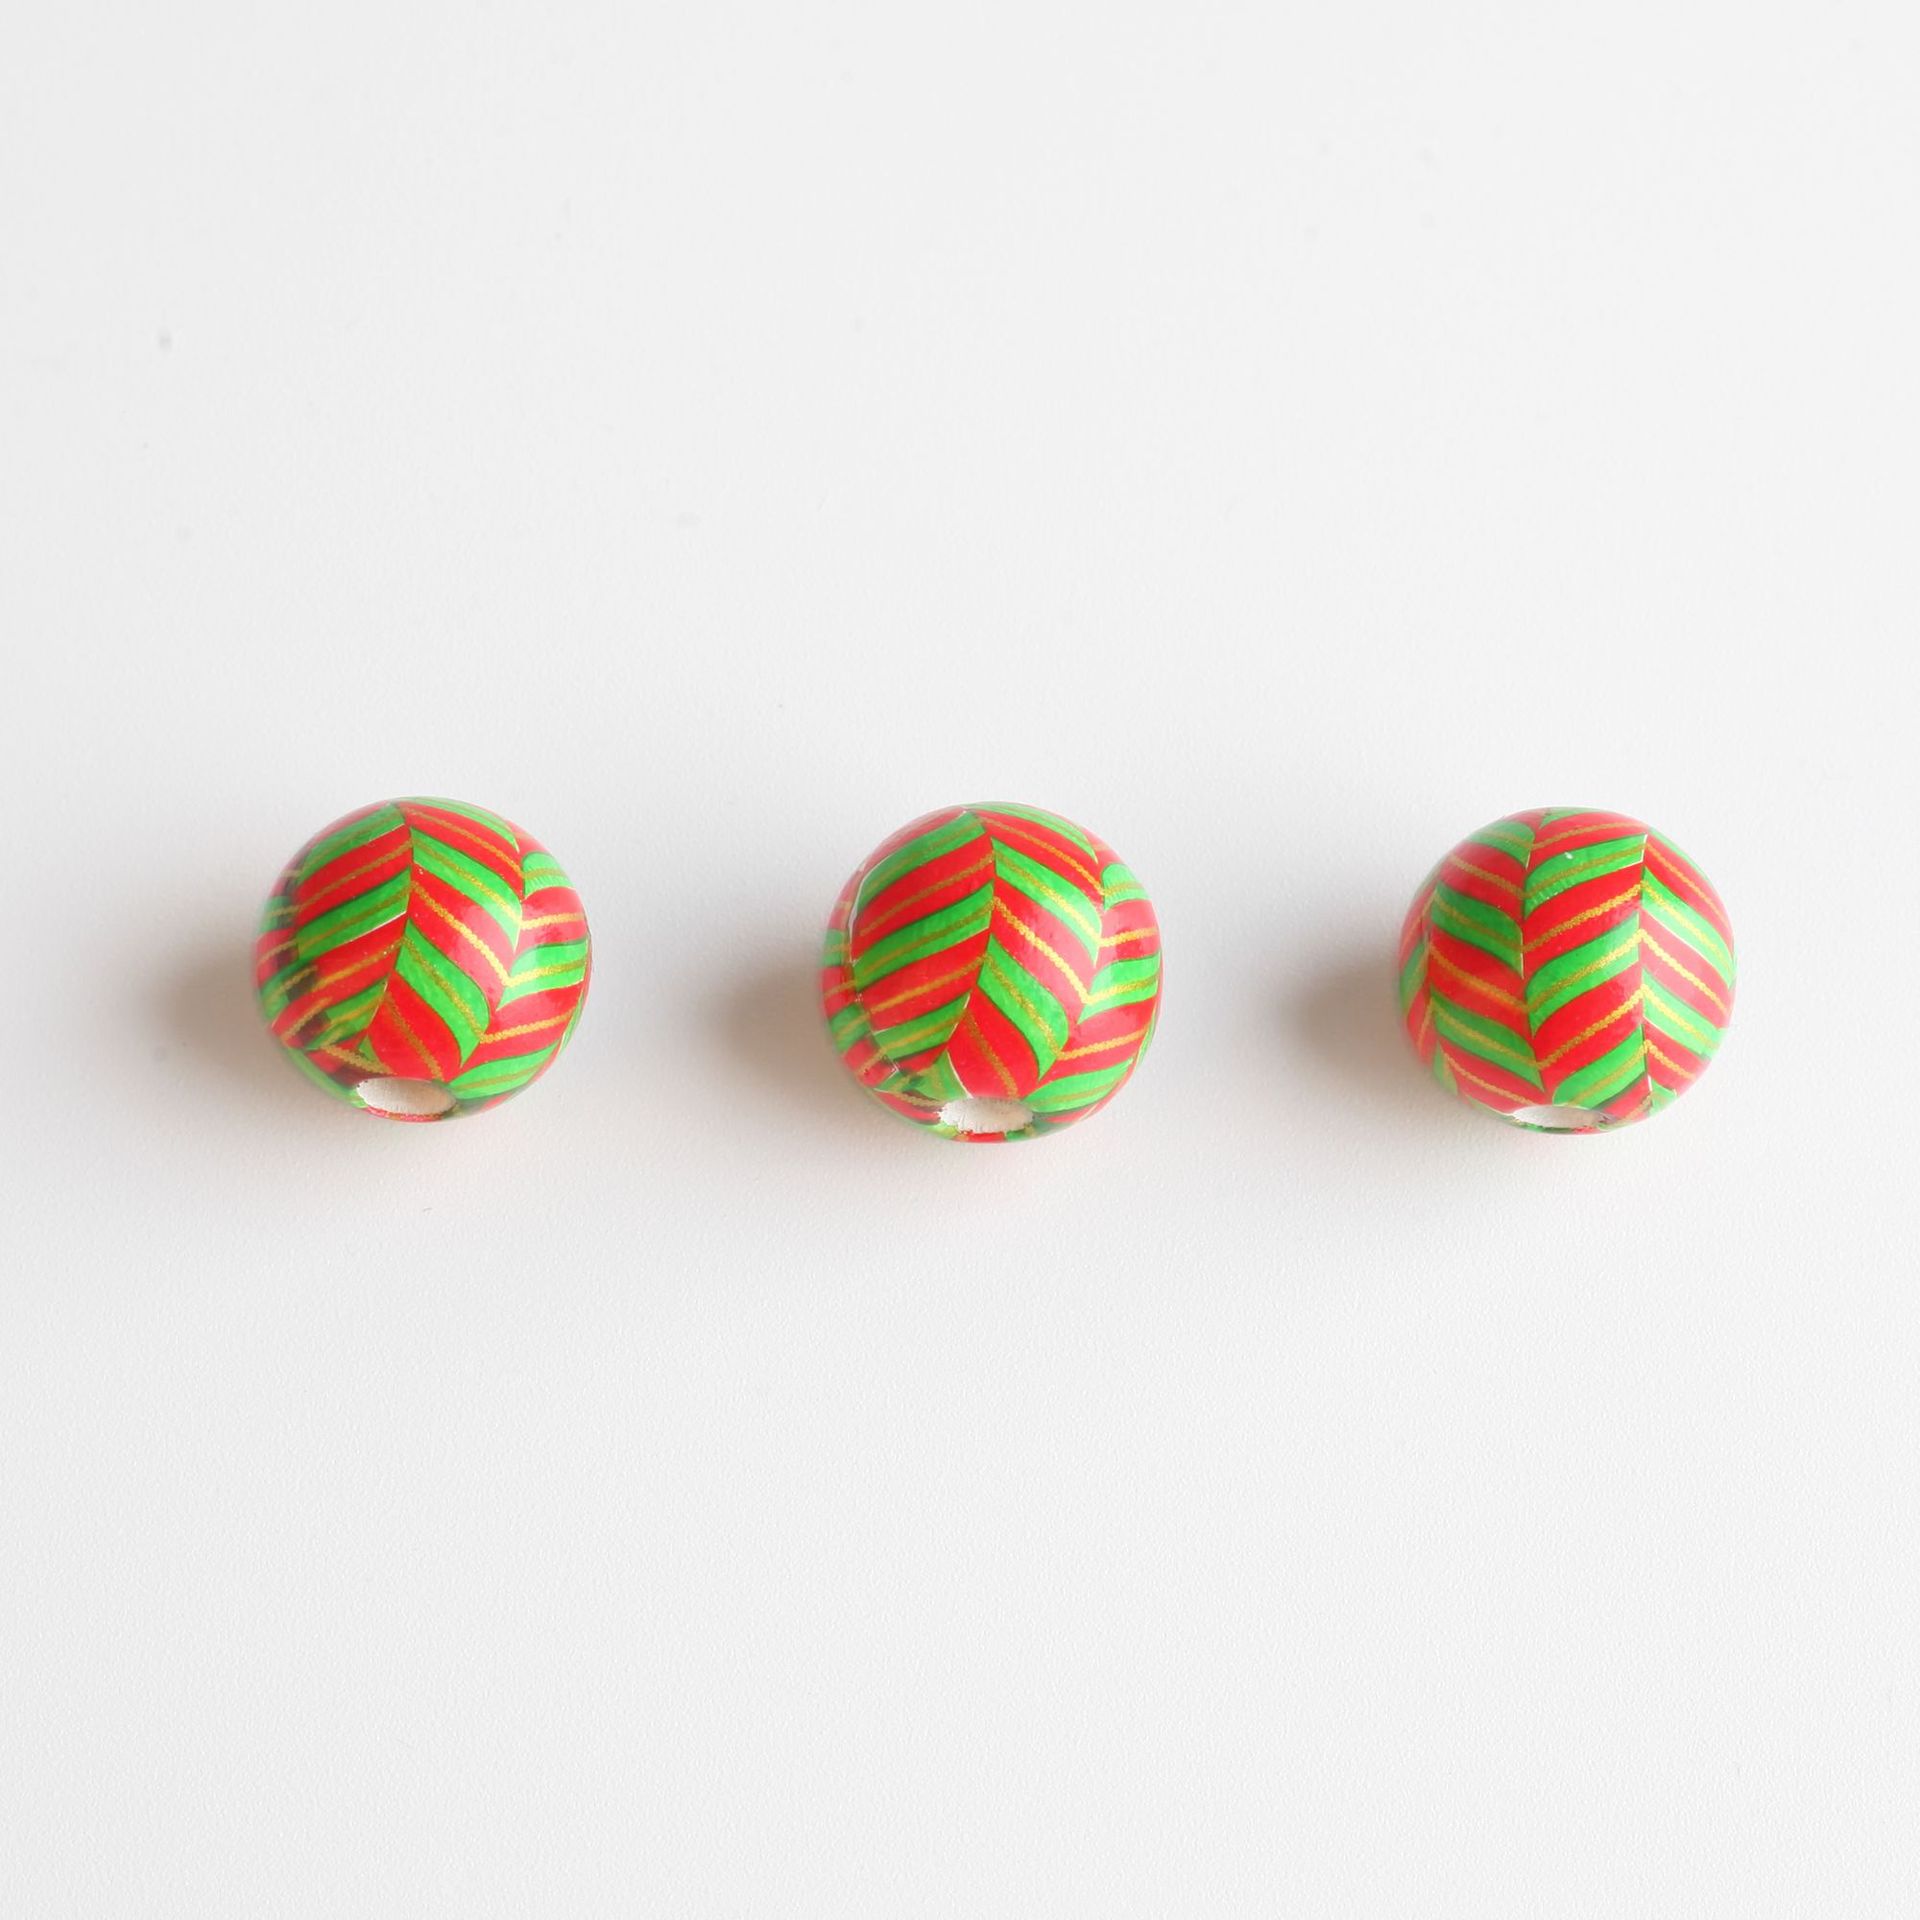 16mm red and green pattern